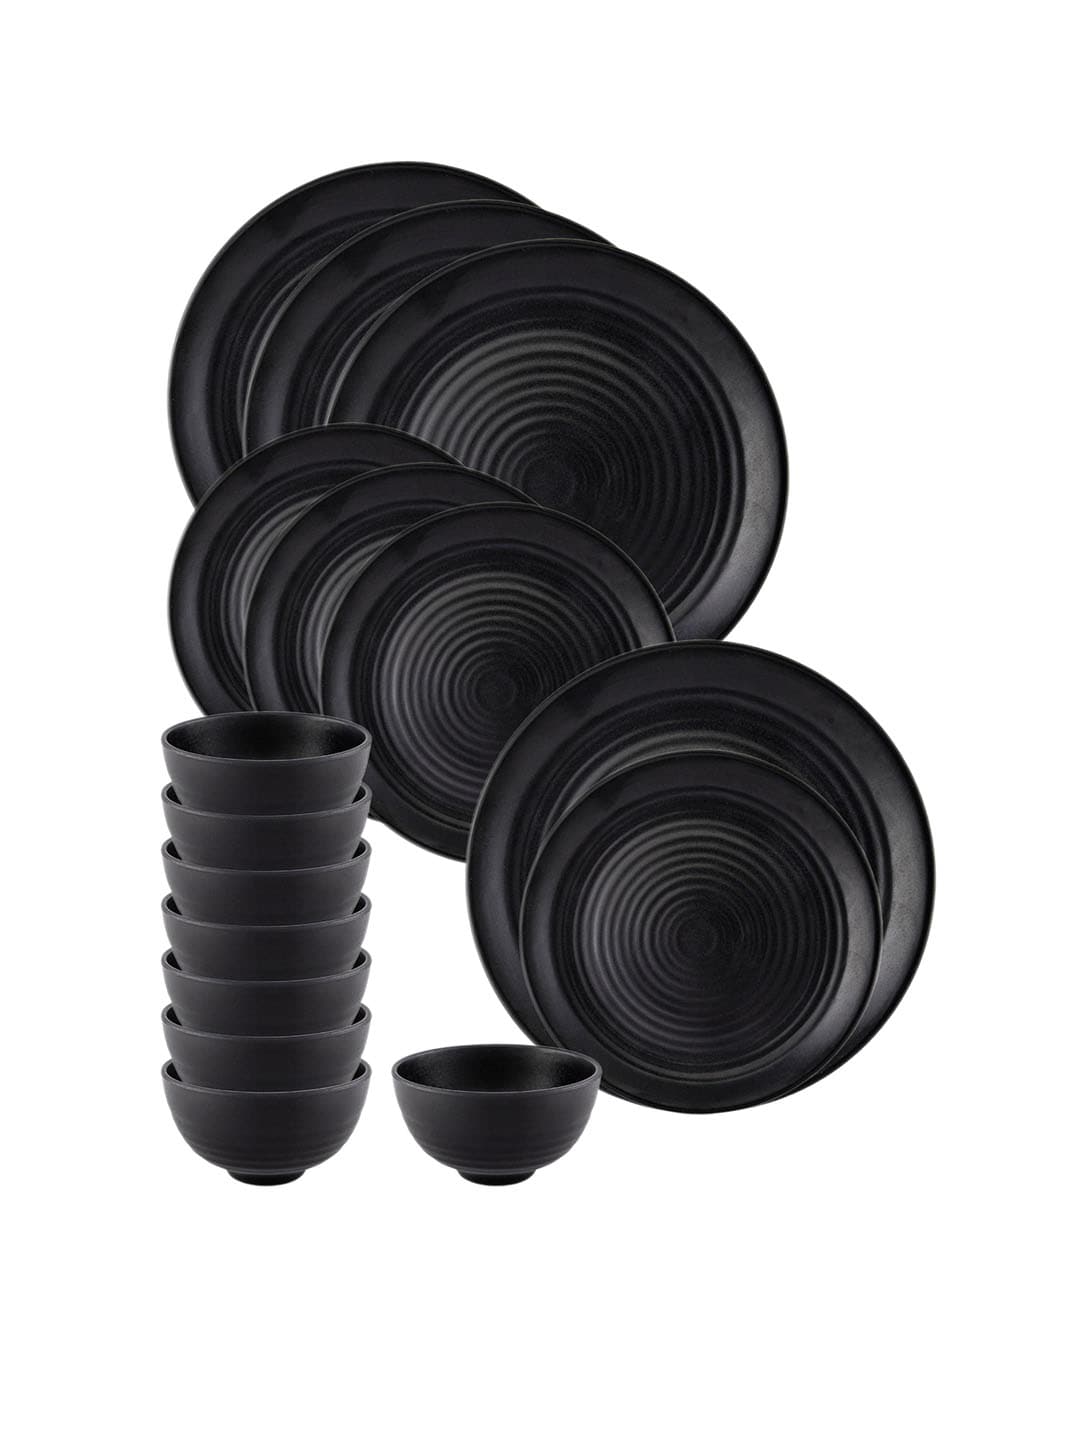 GOODHOMES Black Solid Melamine 16-Piece Dinner Set Price in India